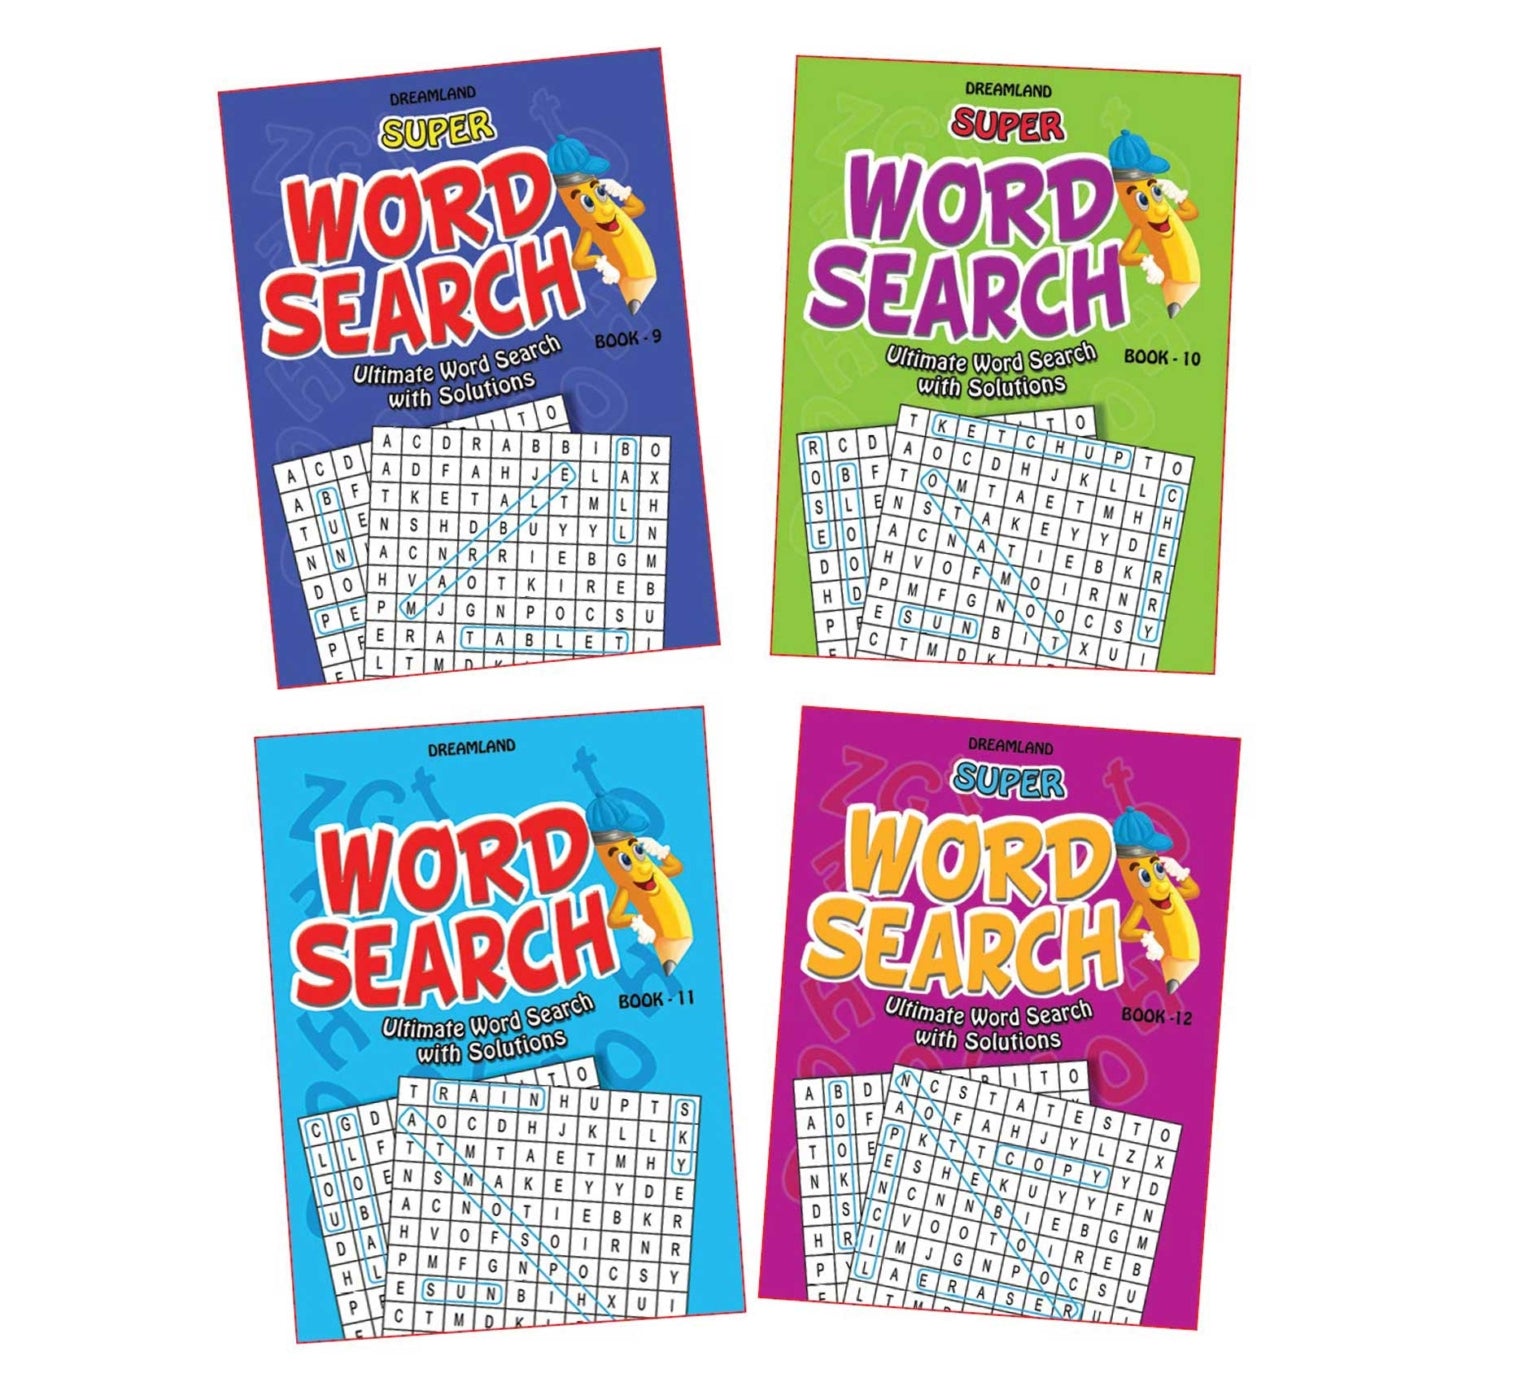 Super Word Search Pack 2 - (4 titles)